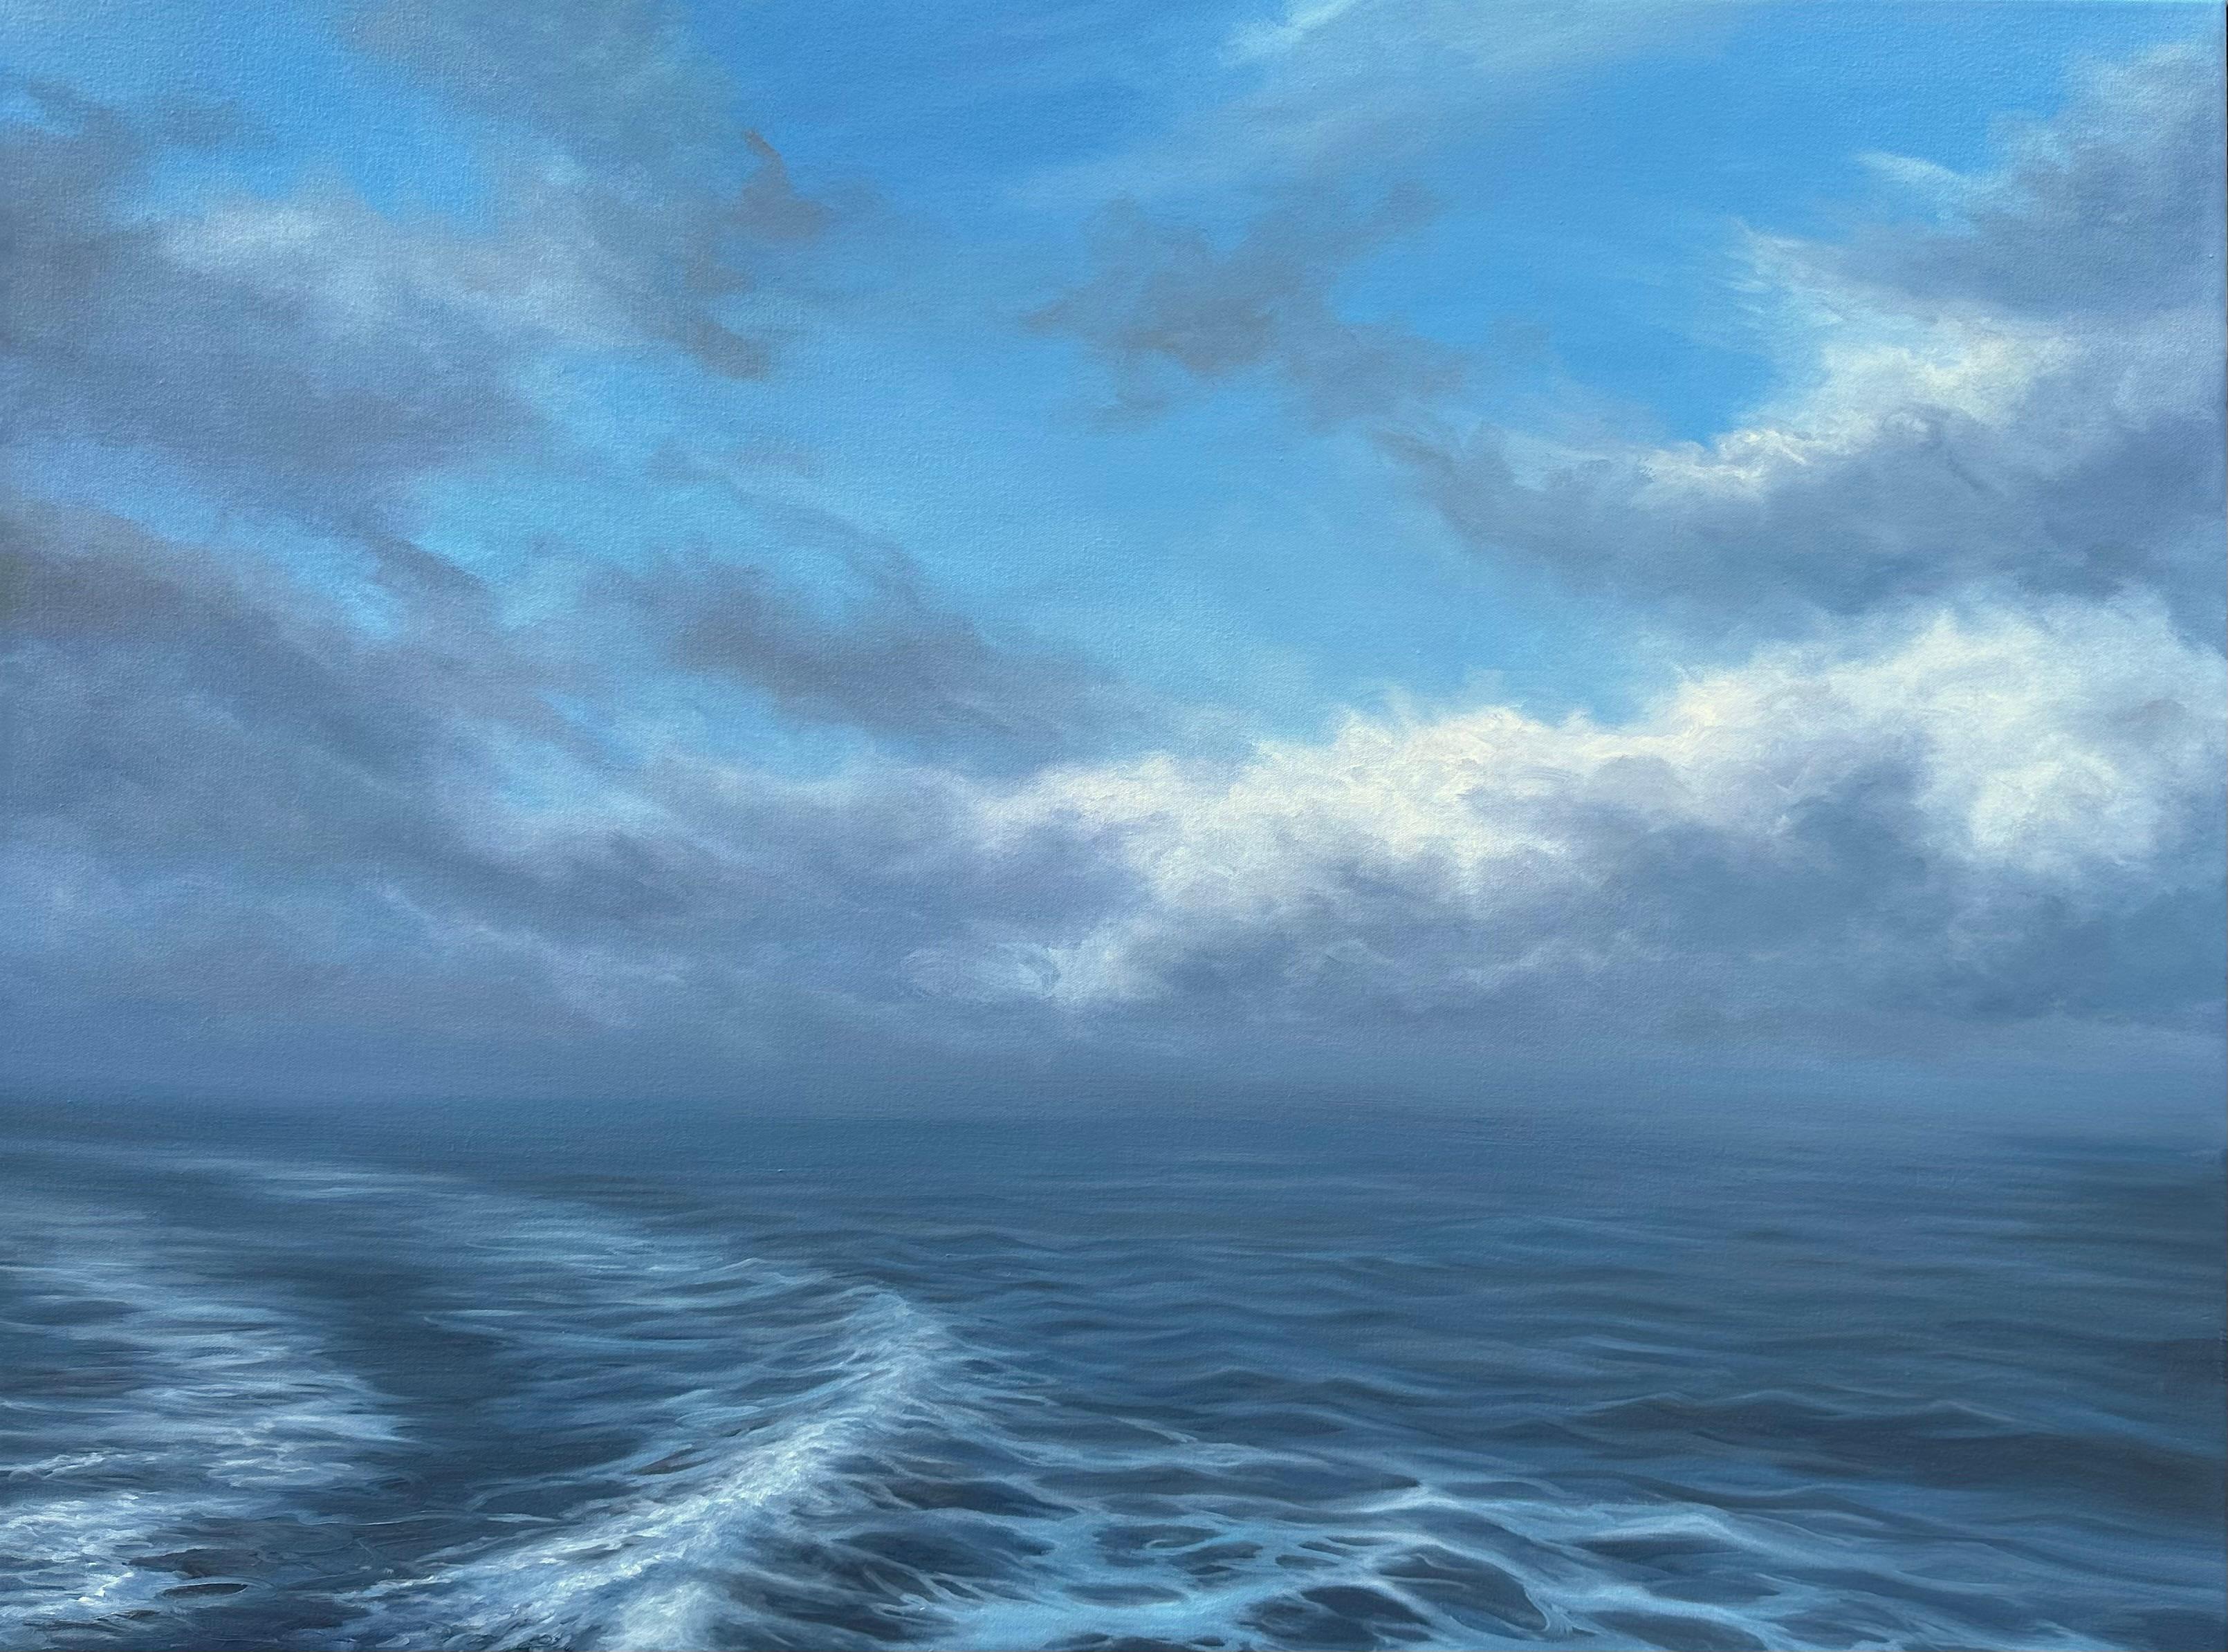 Whitney Knapp Landscape Painting - "Into the Mystic", a landscape oil painting featuring an ethereal sky and shore